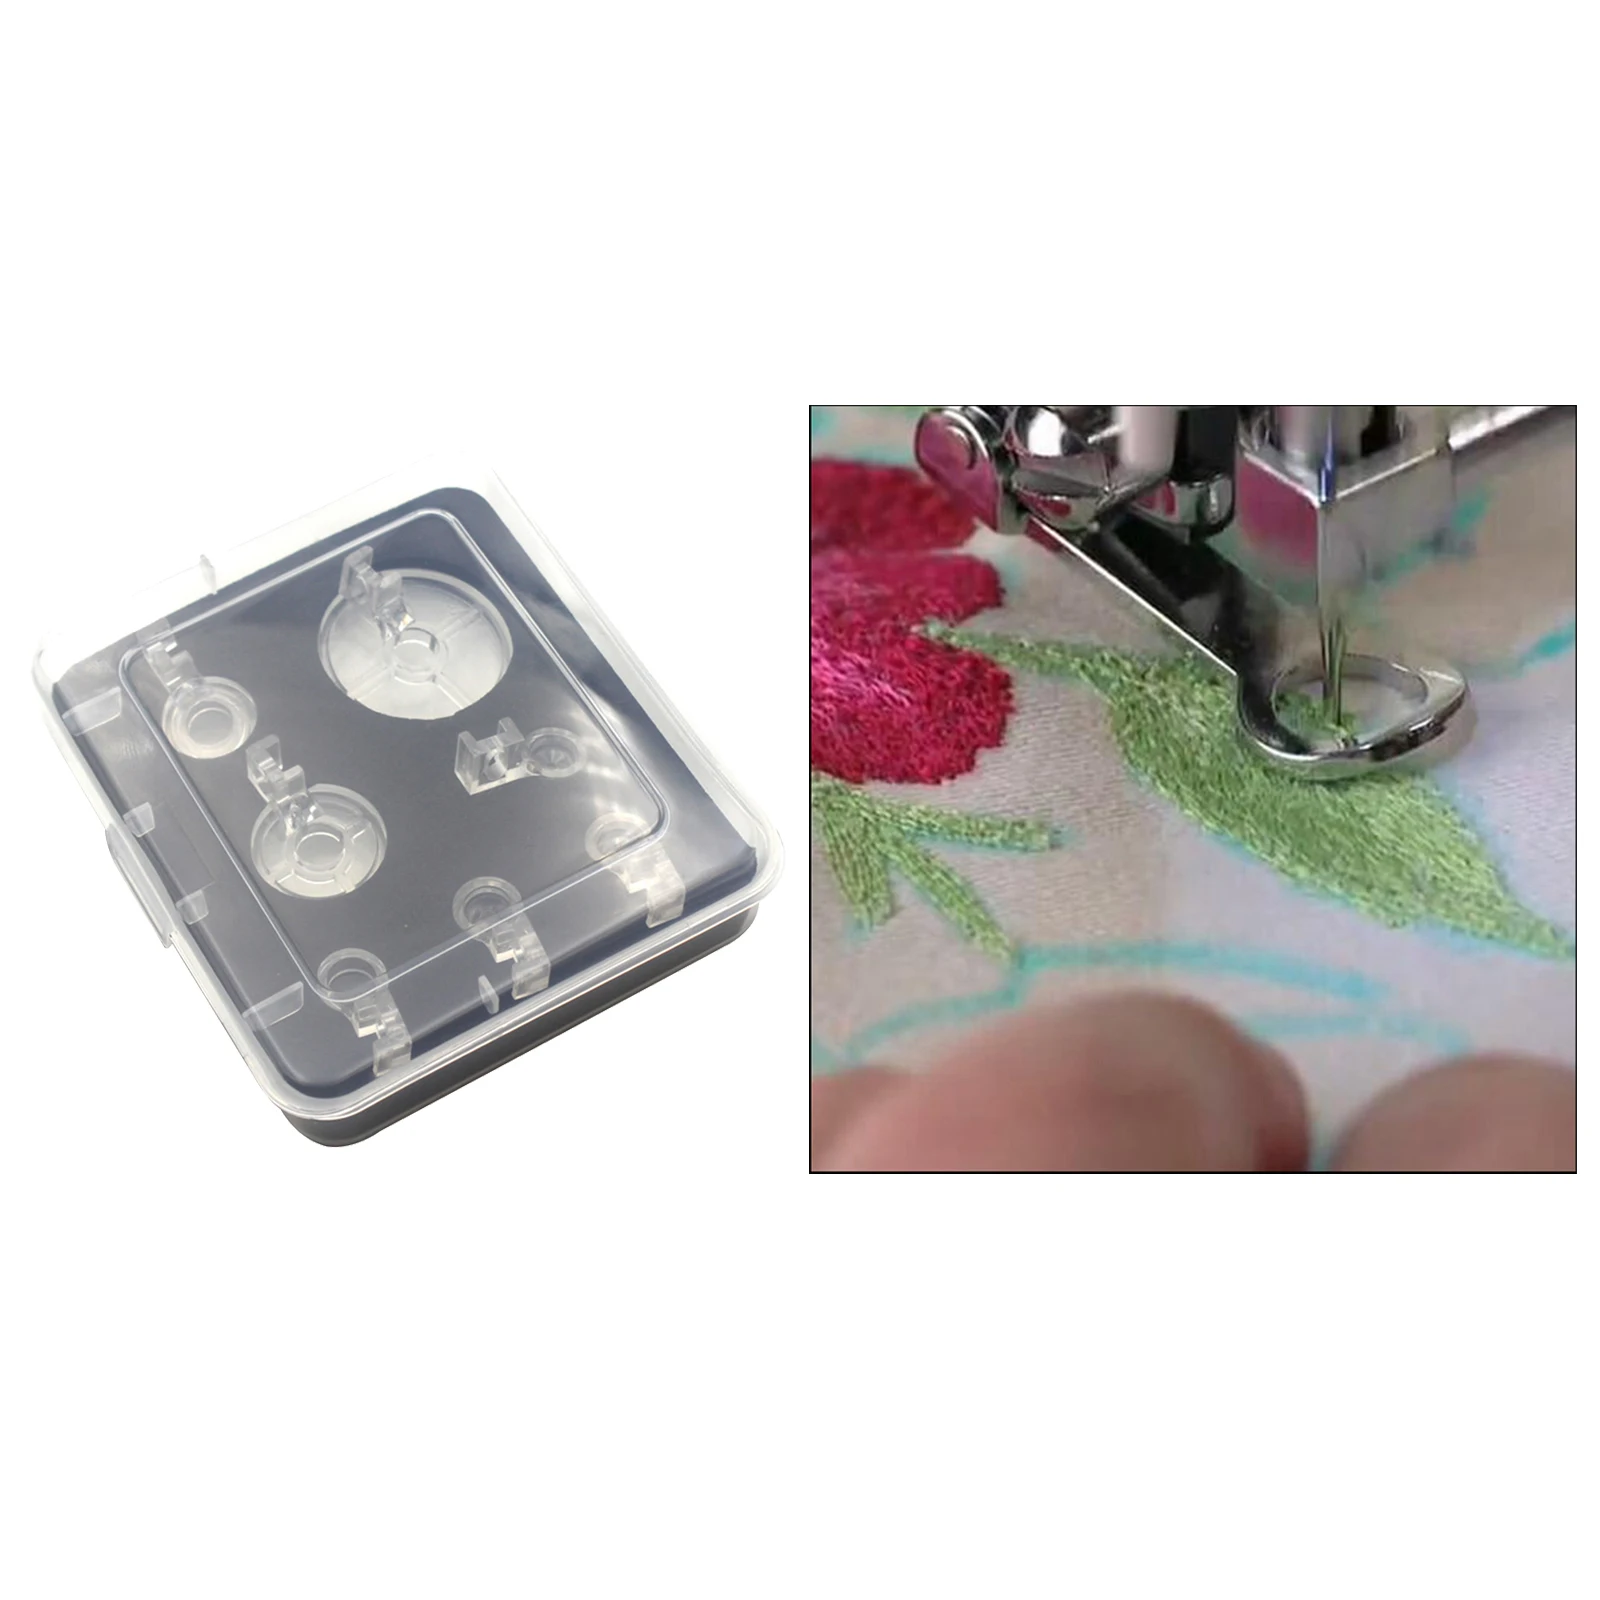 8PCS Multifunction Embroidery Quilting Darning Foot Sewing Machine Presser Embroidery Foot Universal Freedom Embroidery